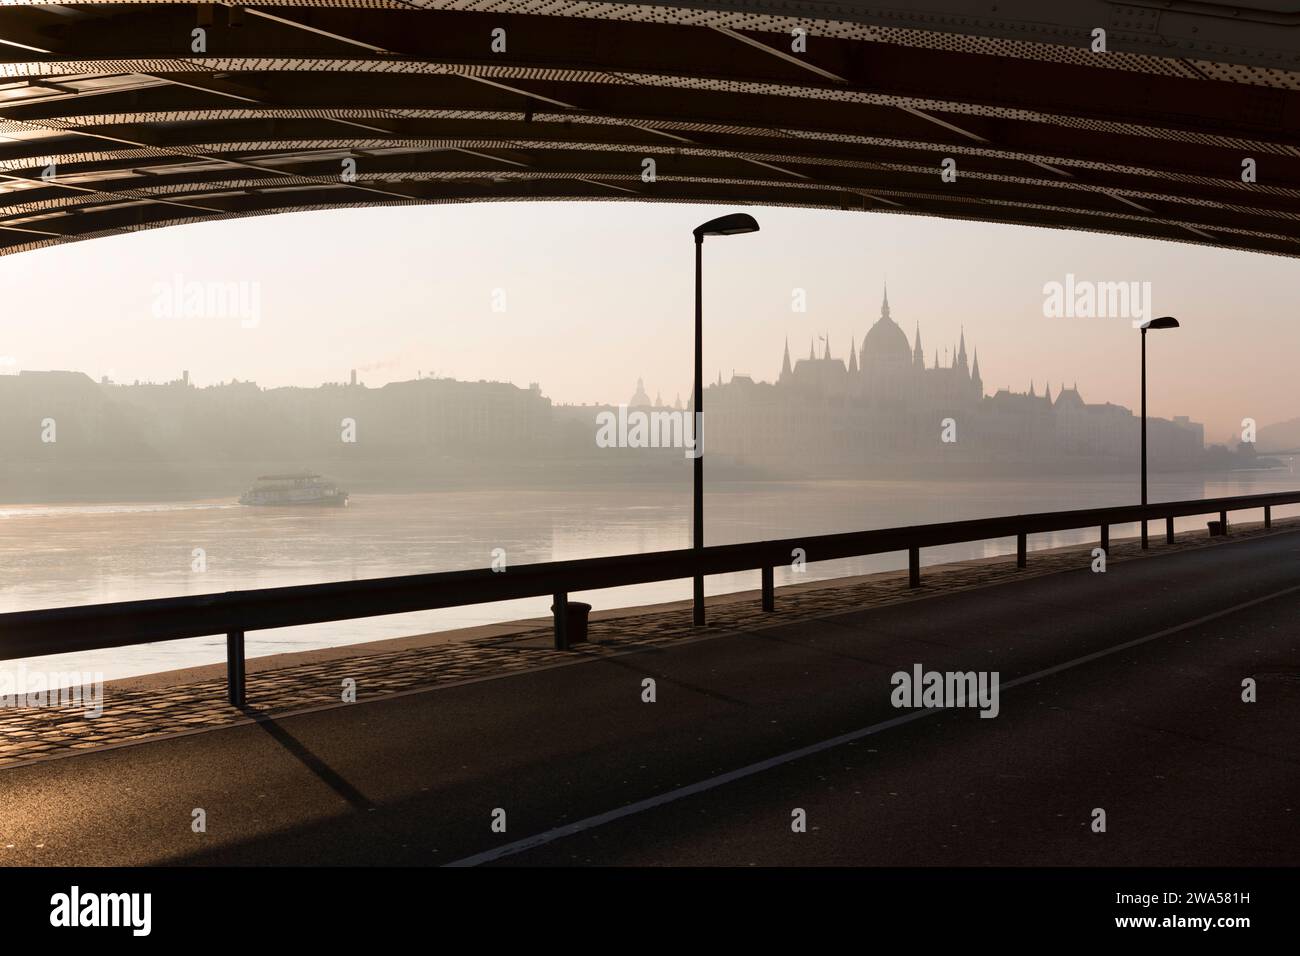 Hungary, Budapest, view of Parliament over the Danube in the early morning from underneath the Margaret Bridge. Stock Photo